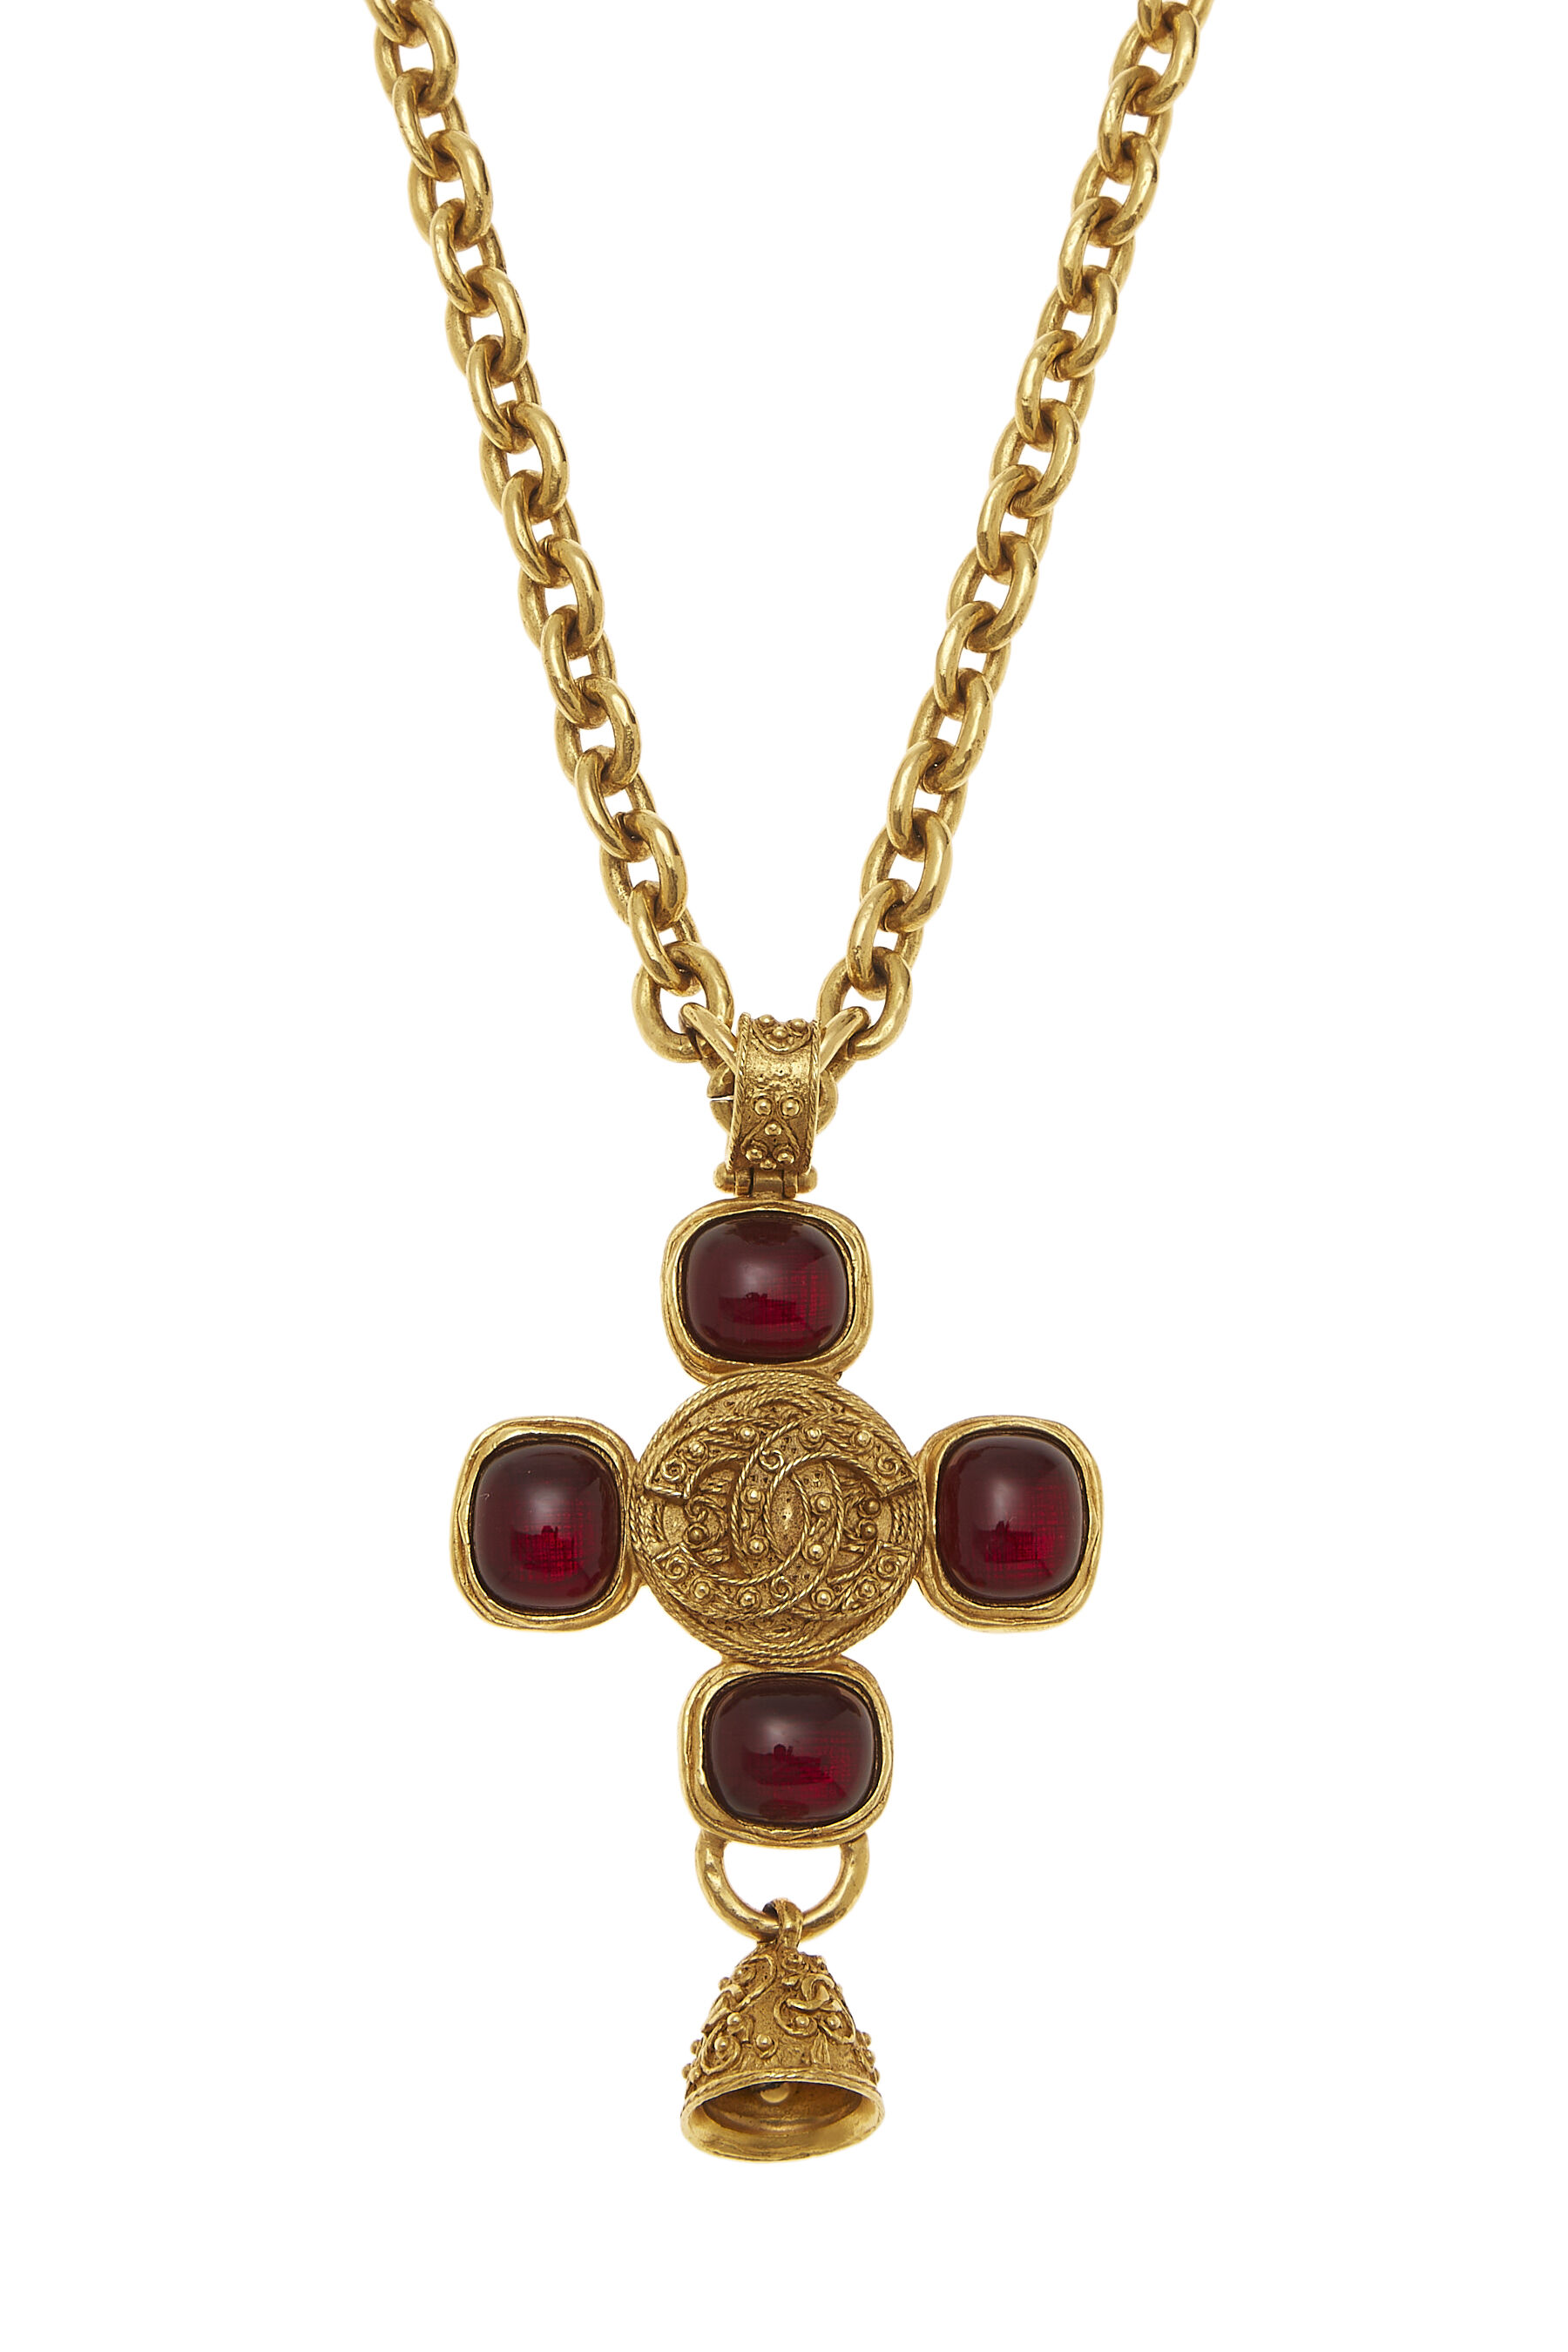 Chanel Gold & Red Gripoix Cross Necklace Long Q6JBBH17RB001